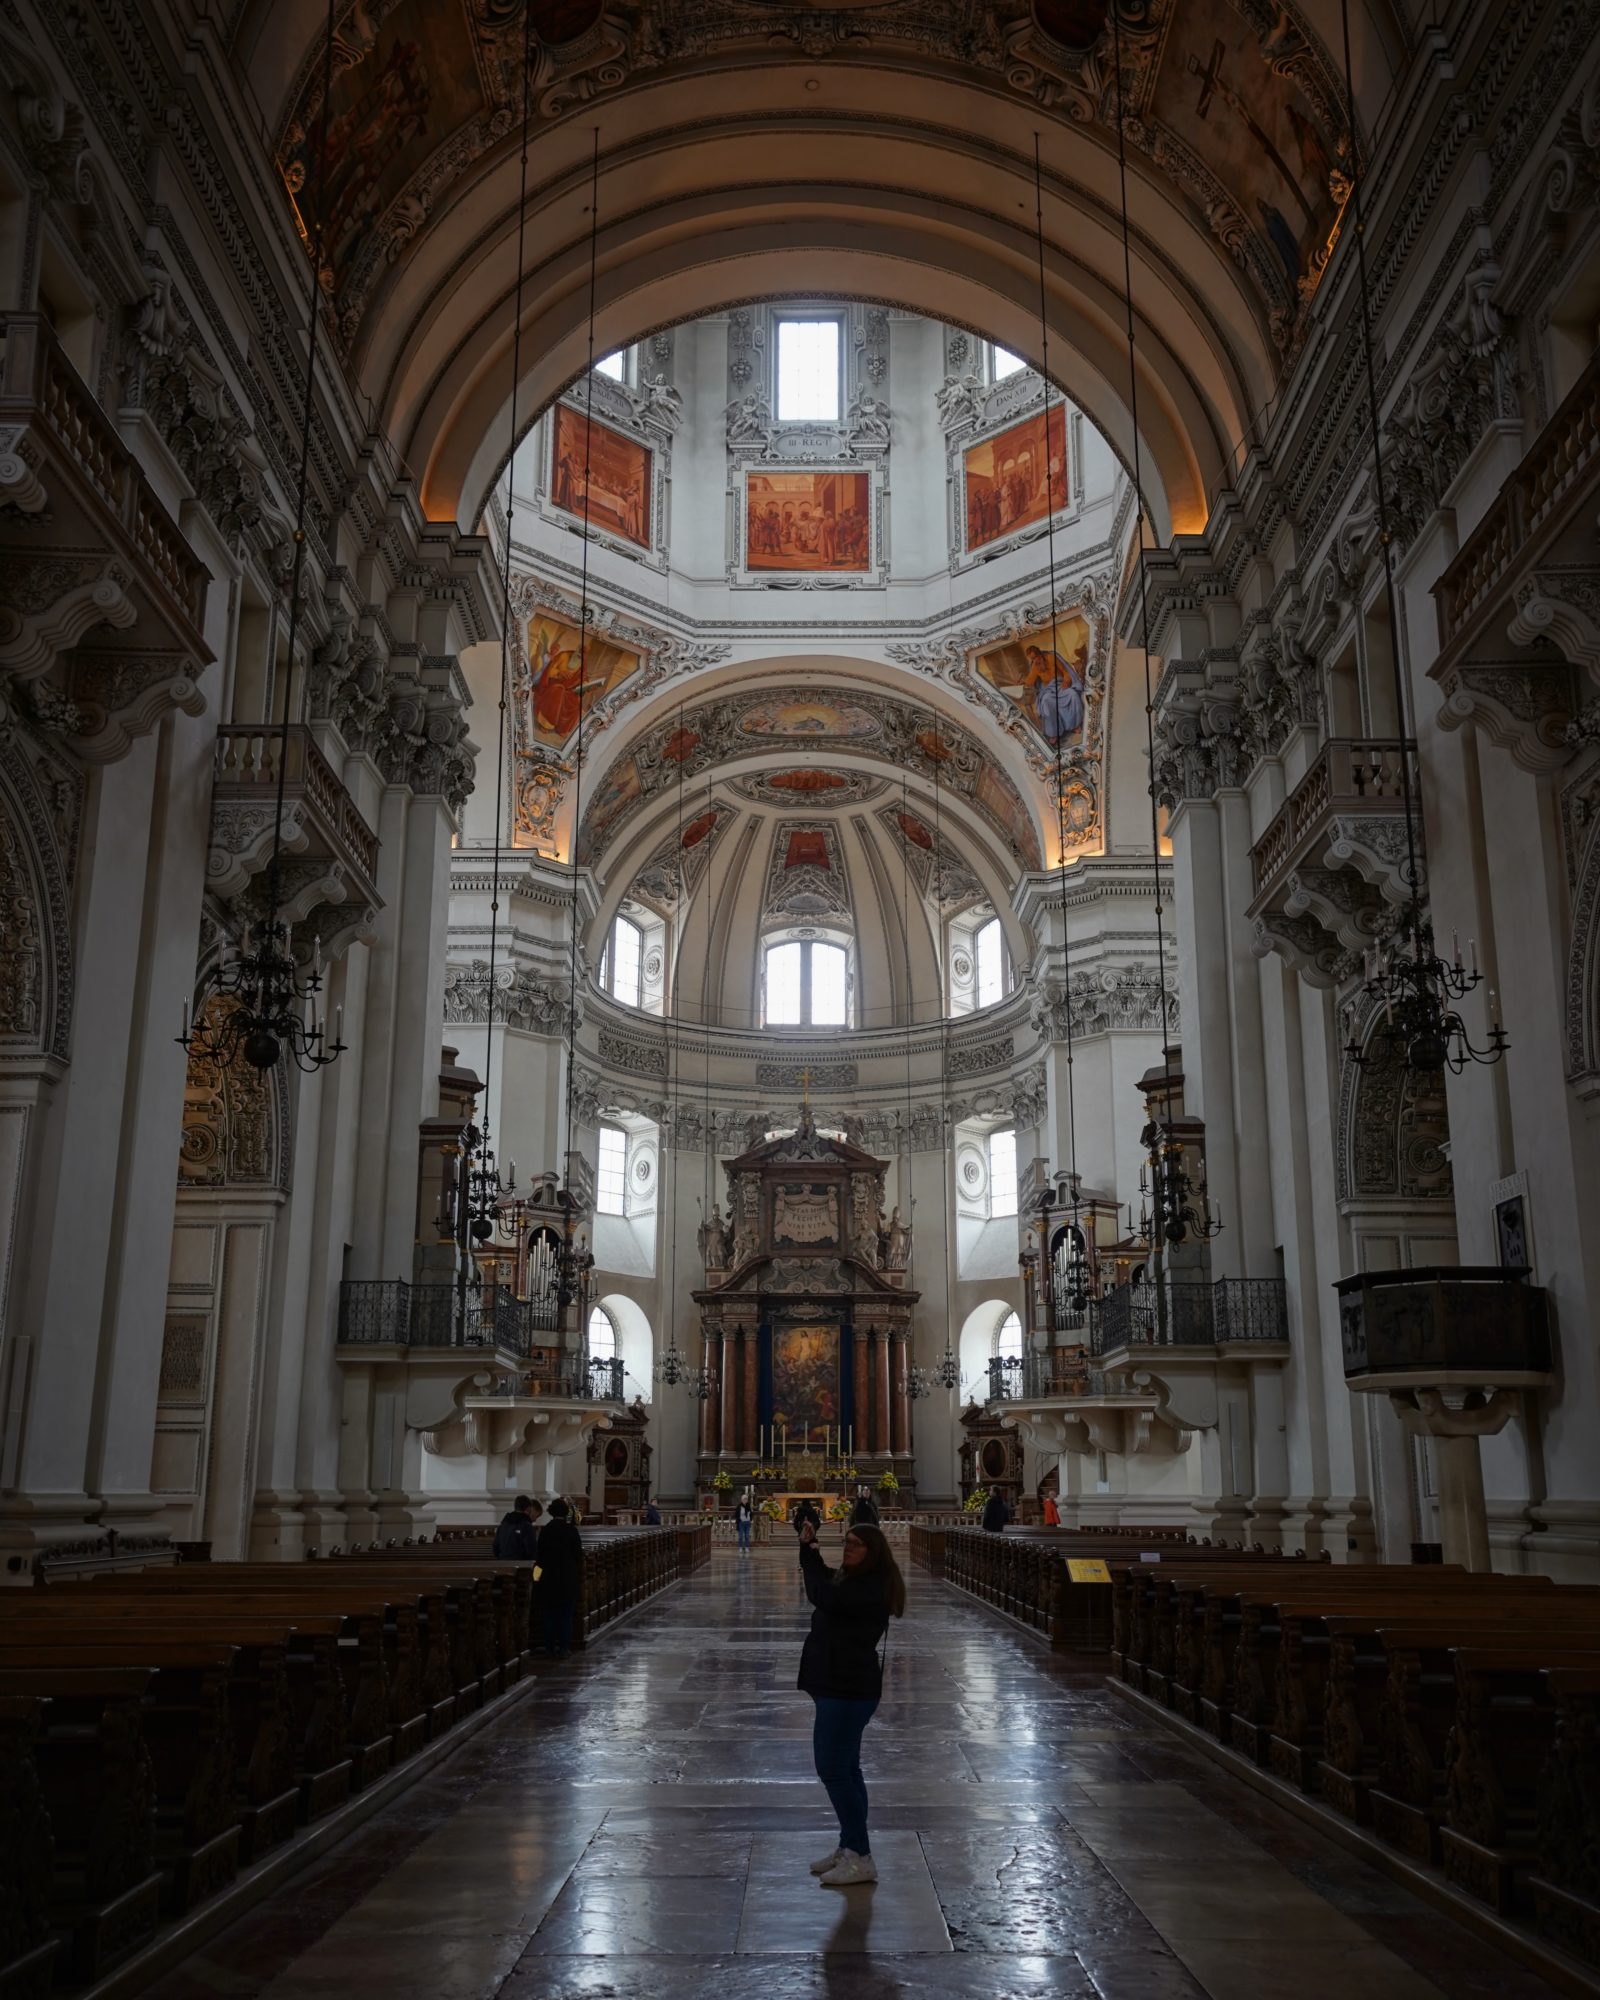 Shooting inside Salzburg Cathedral. Someone else is in the centre of the aisle also taking a picture with their phone